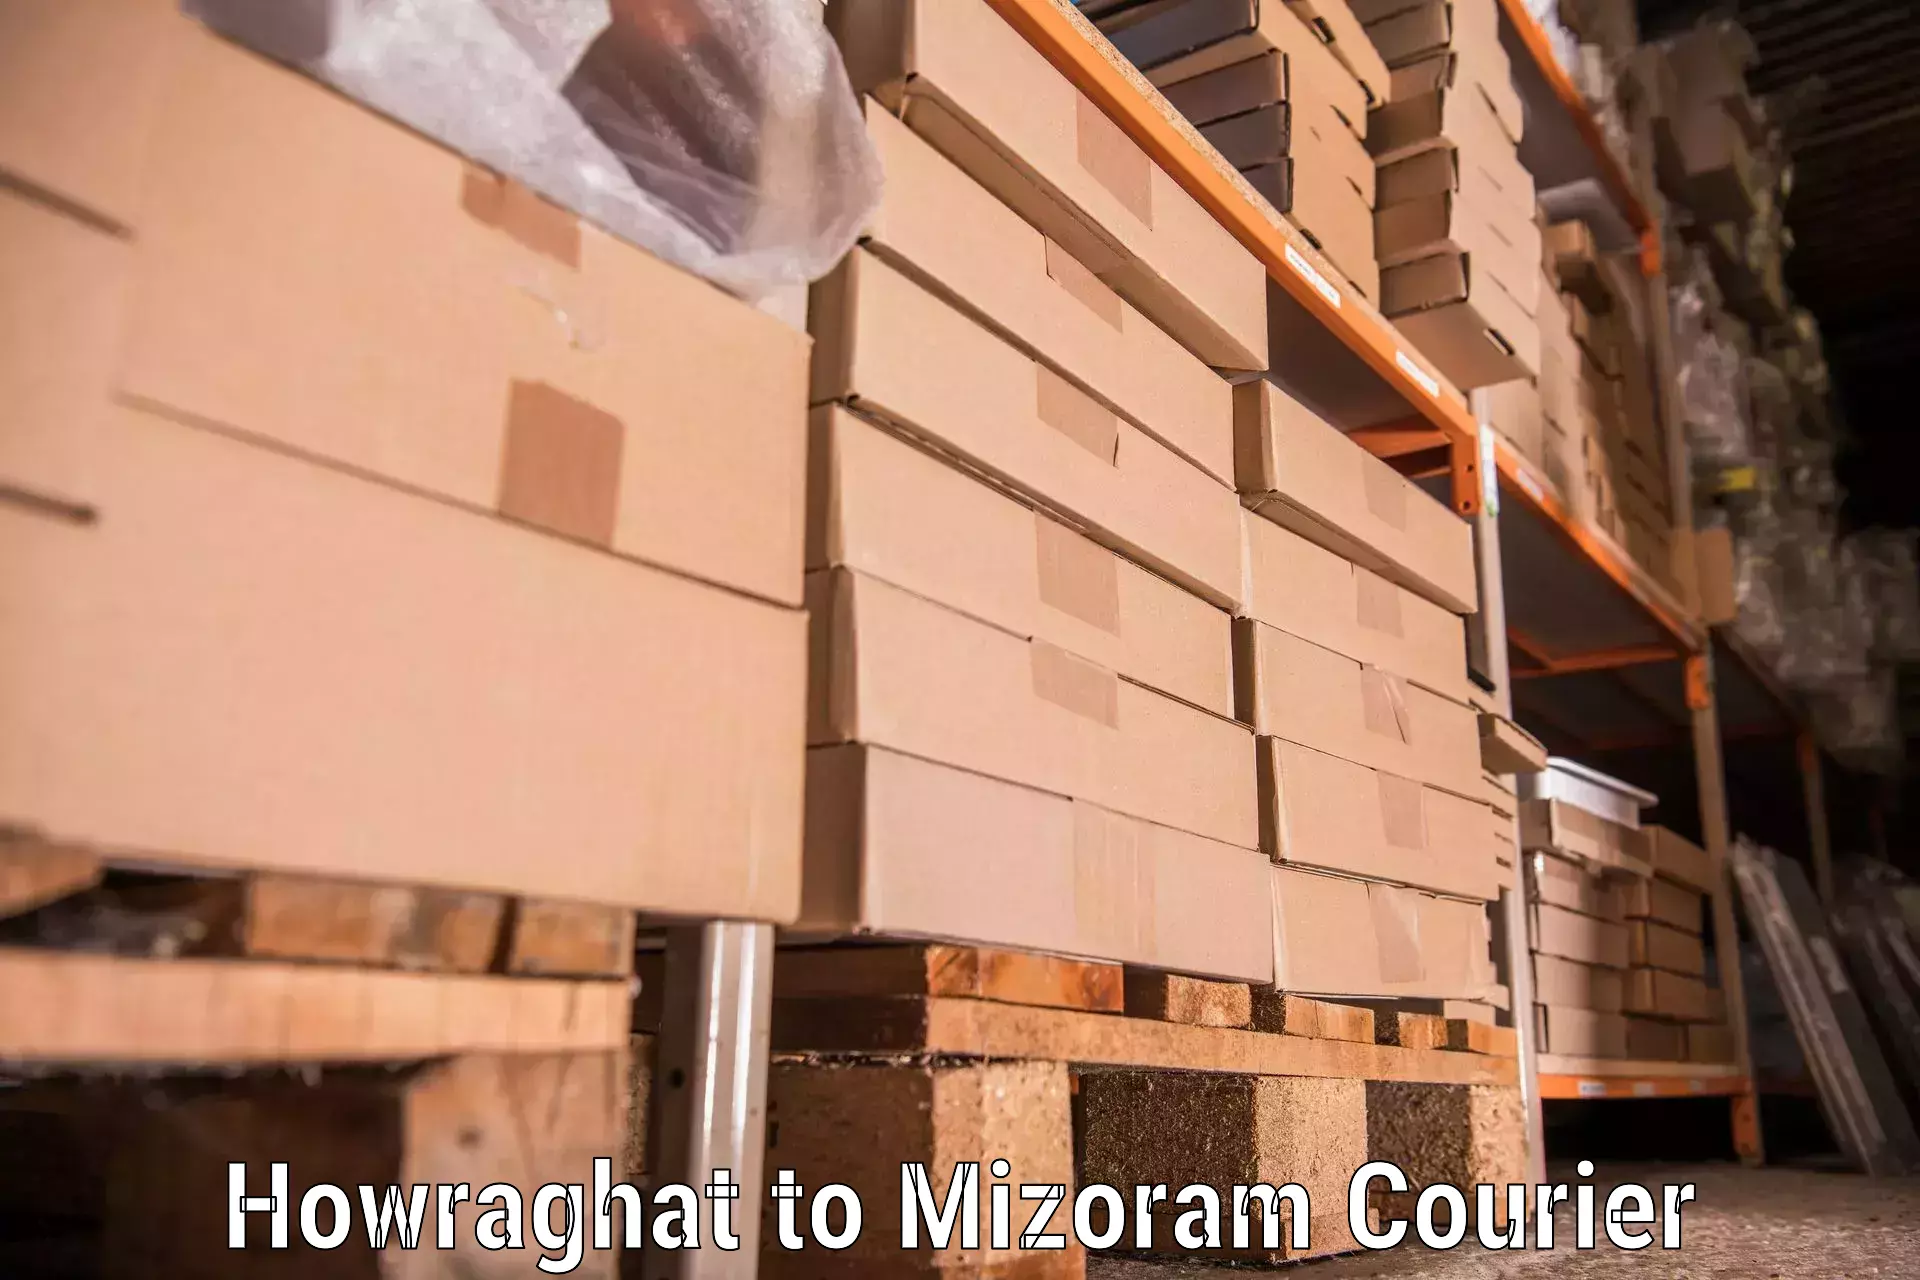 Home goods moving company Howraghat to Mizoram